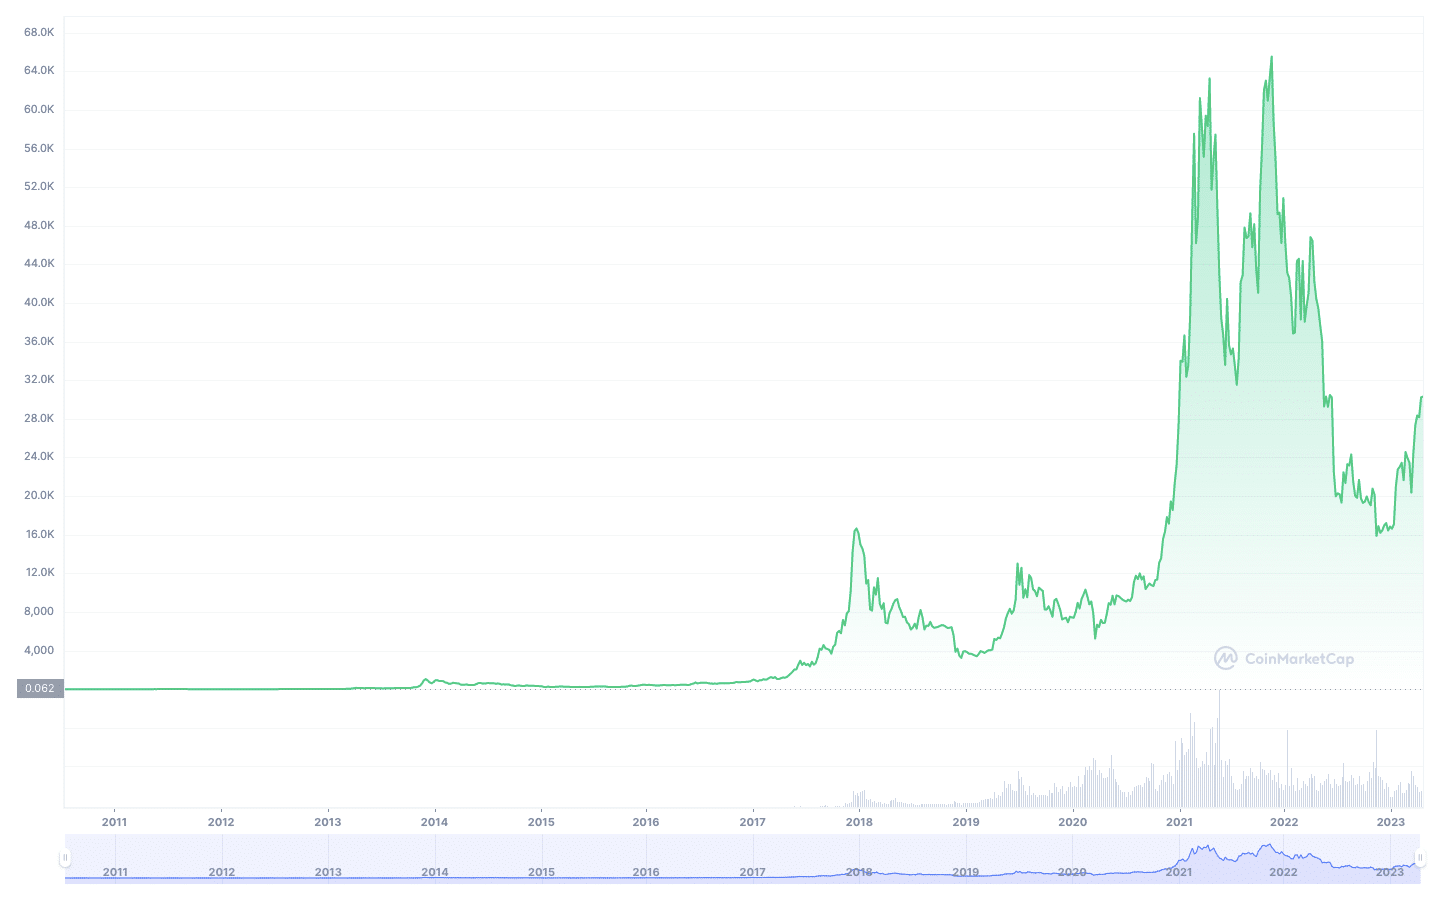 BTC's price history may explain what's going on with Bitcoin.